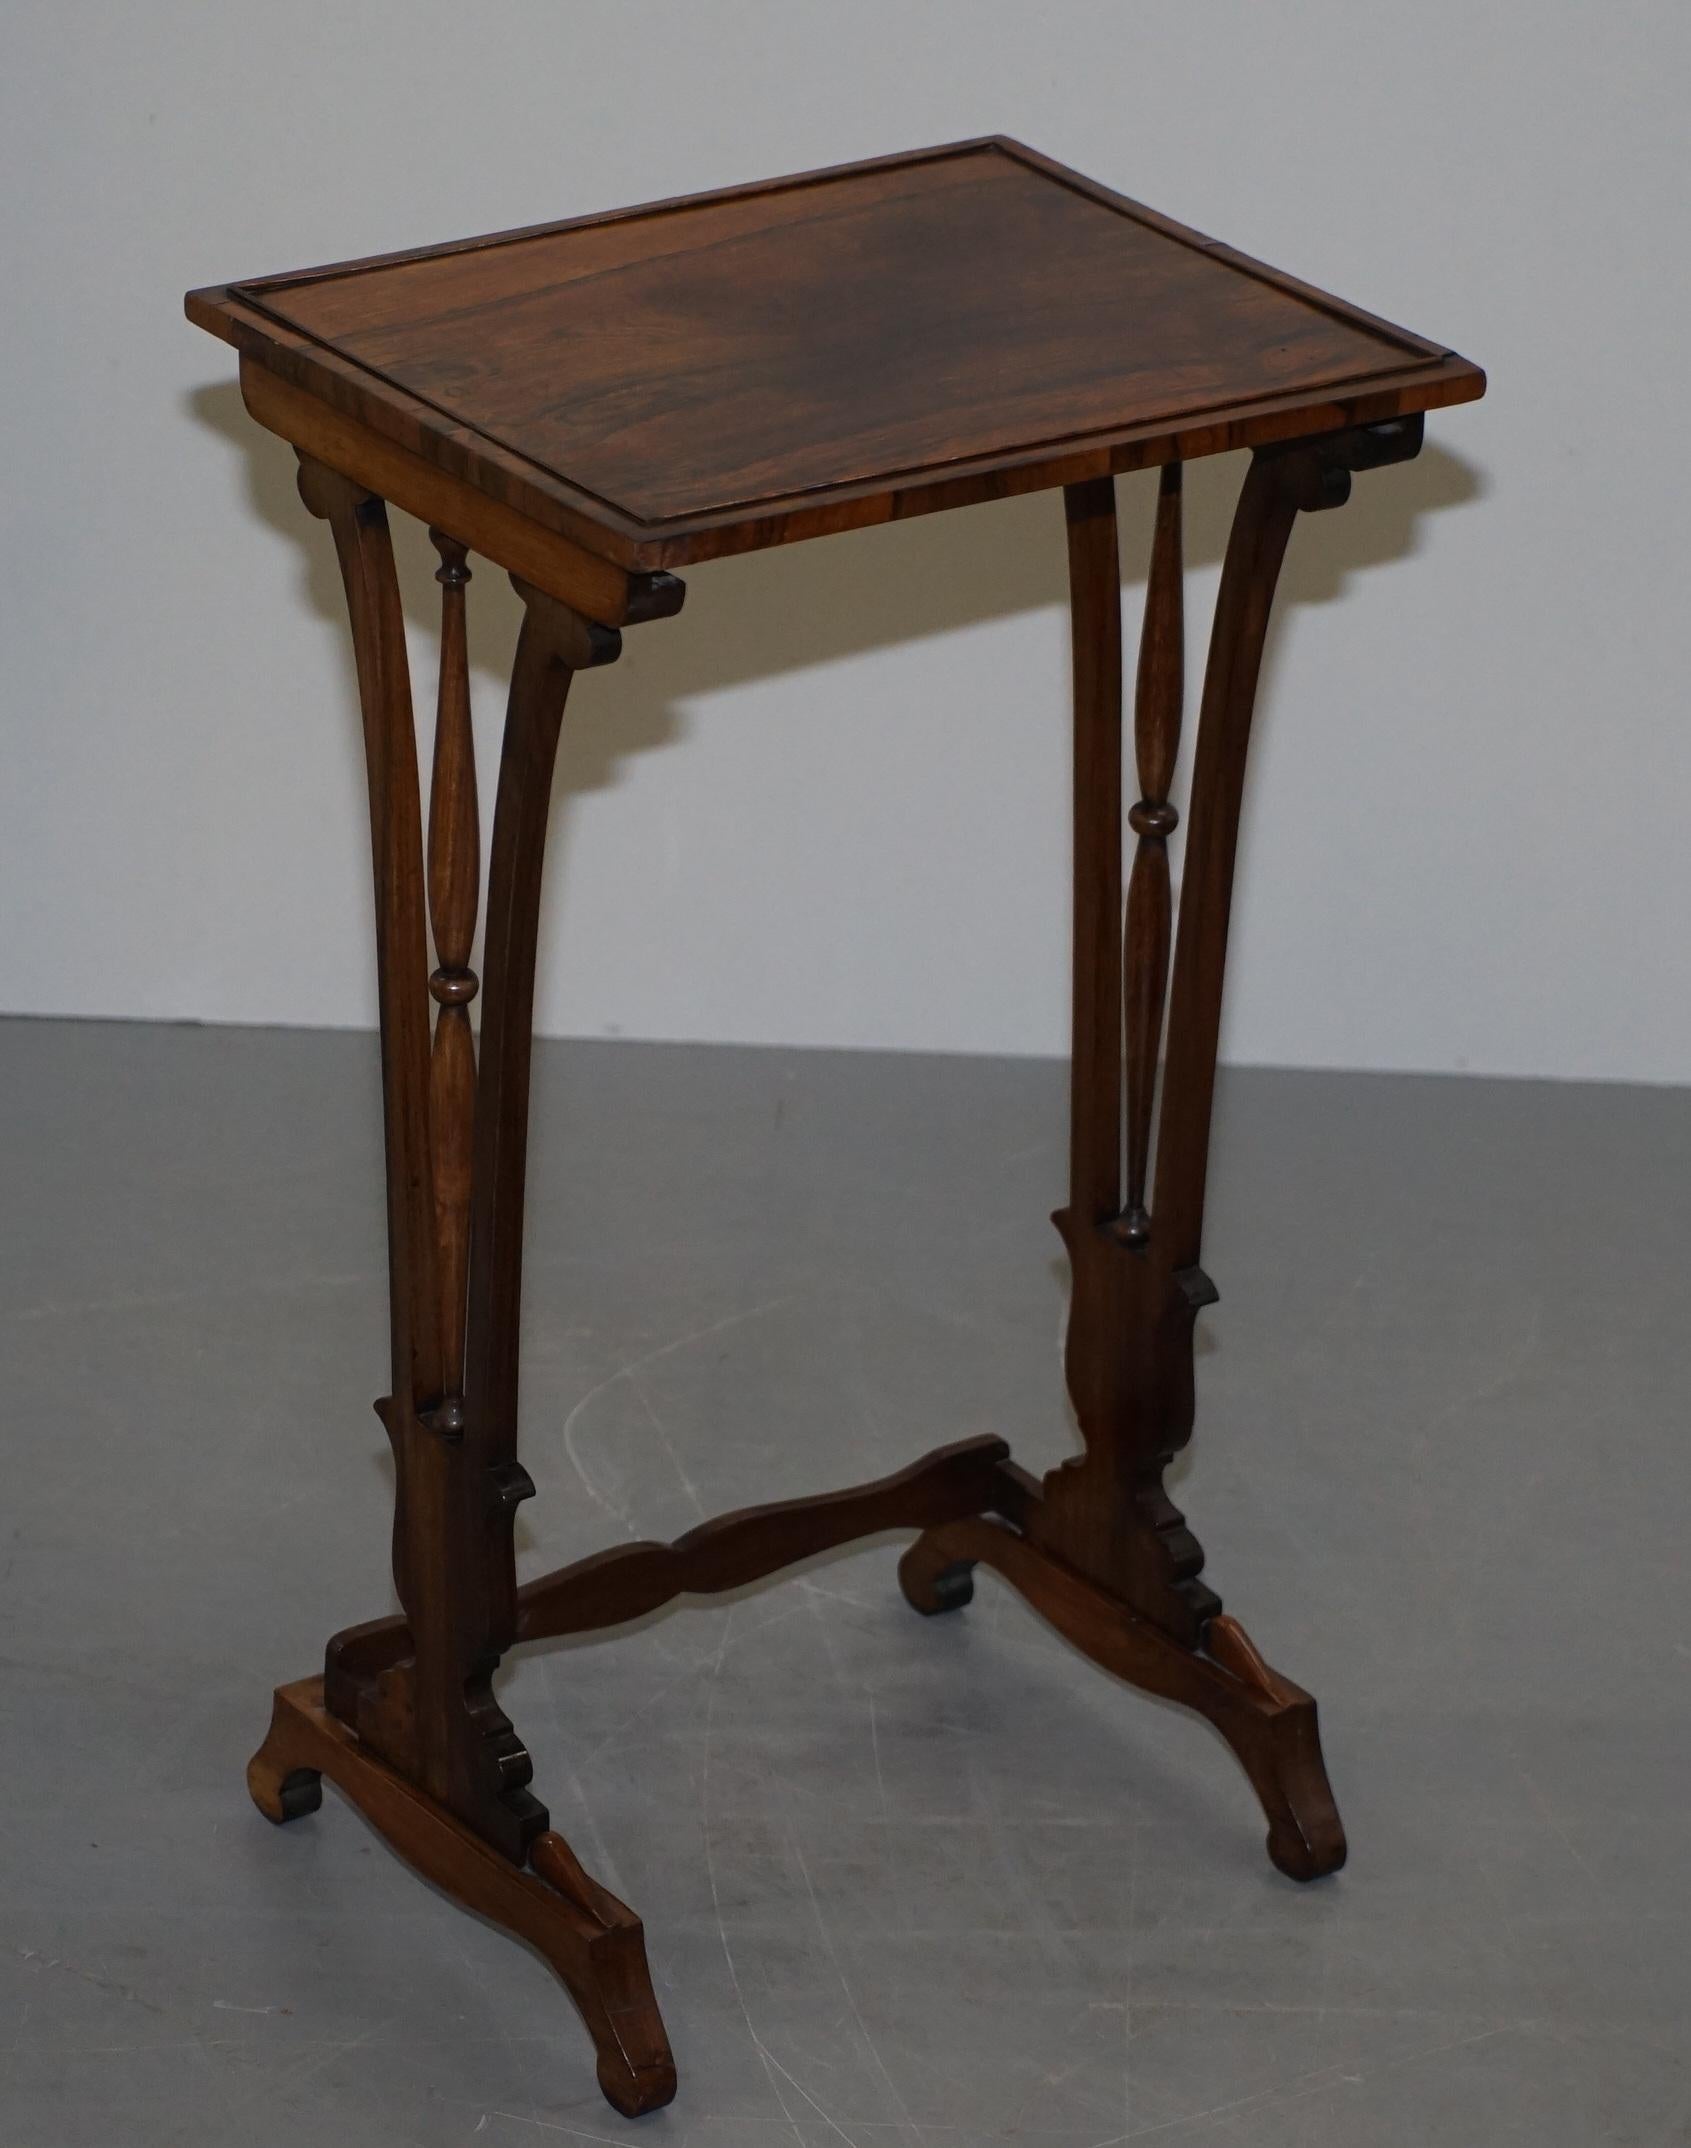 Fine Regency Nest of Hardwood Tables with Chessboard Top Attributed to Gillows For Sale 9